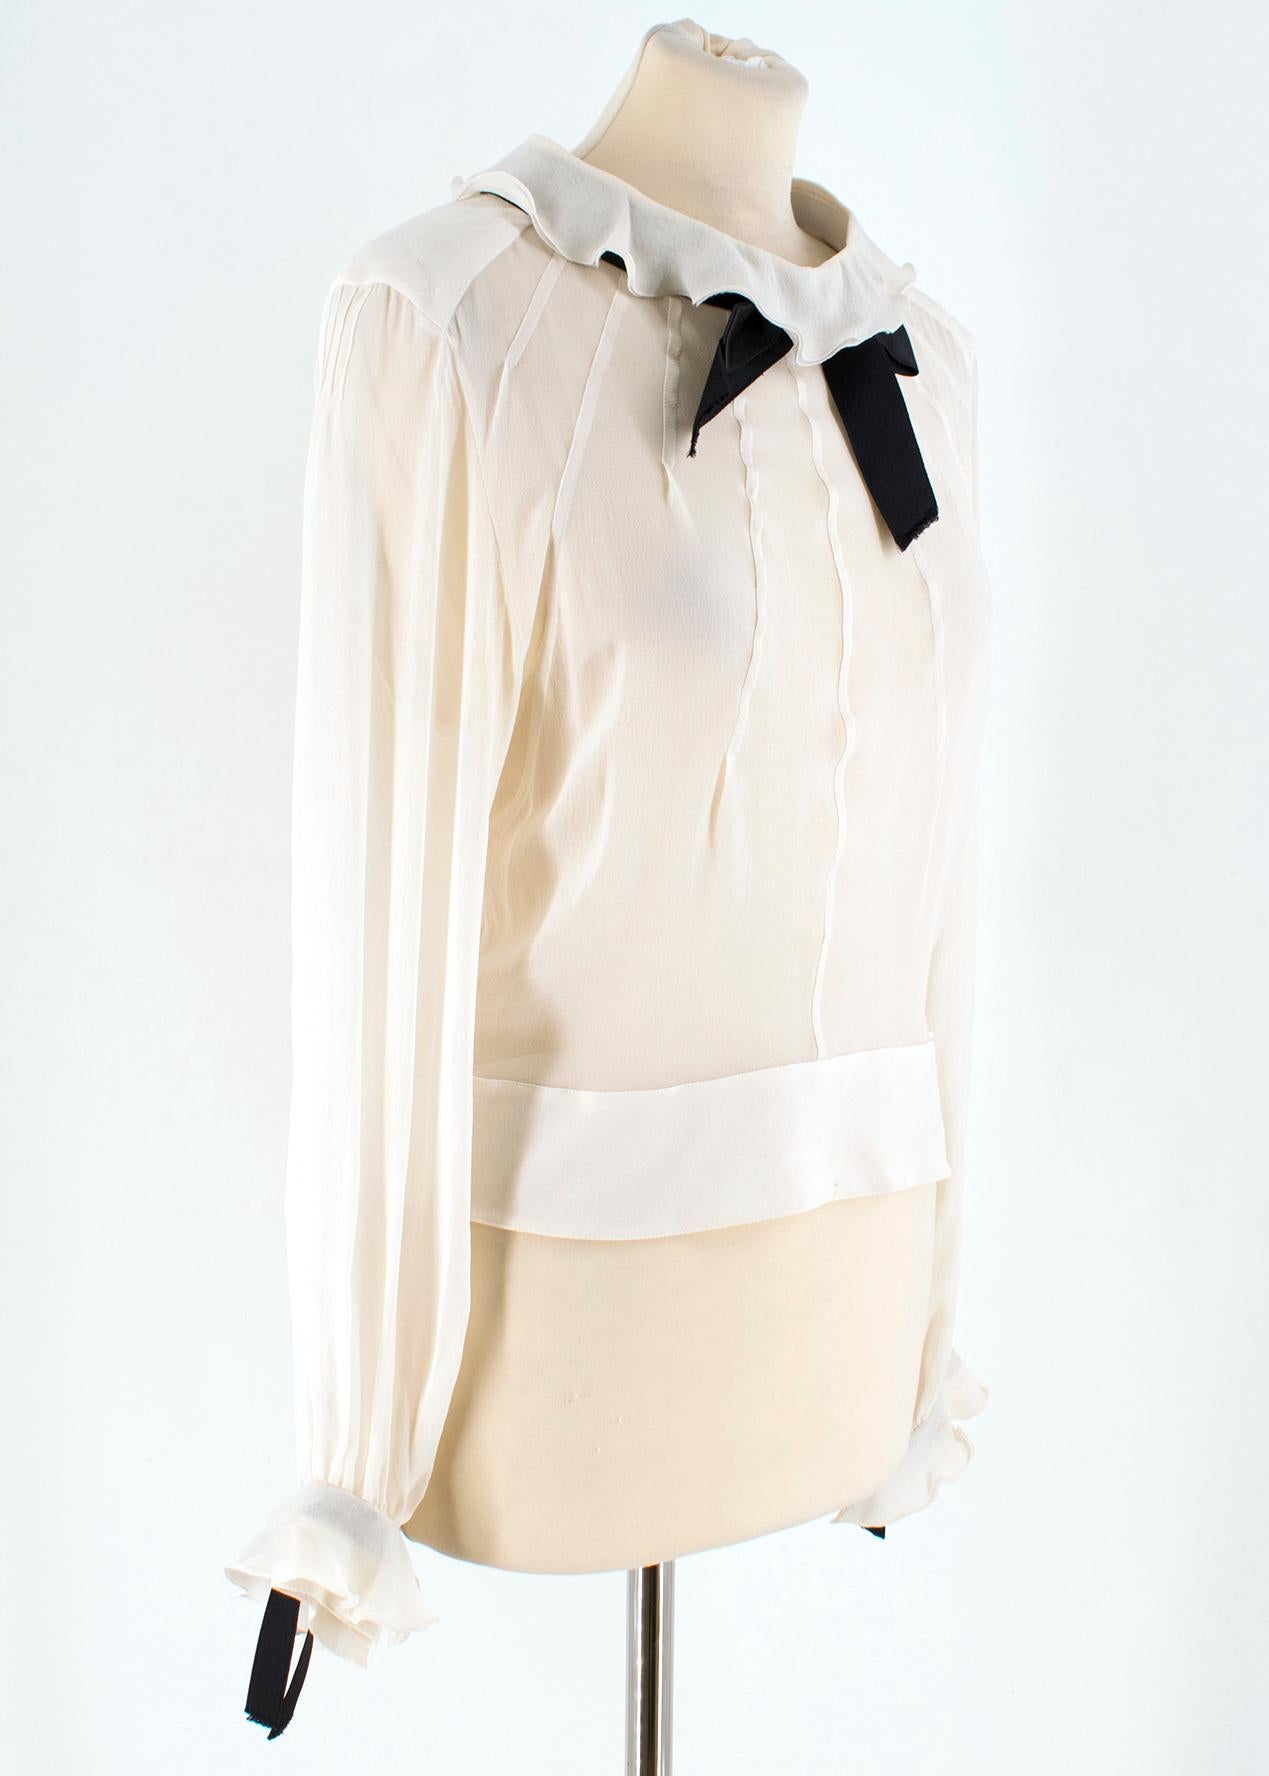 Chanel Cream Silk-Chiffon Blouse 

- Cream Silk-chiffon blouse
- Black bow detail at collar and sleeve
- Ruffled collar and cuffs
- Faux pearl detail 
- Quilted thin shoulder pads
- Seam paneling down front and back  
- Button fastening behind neck,